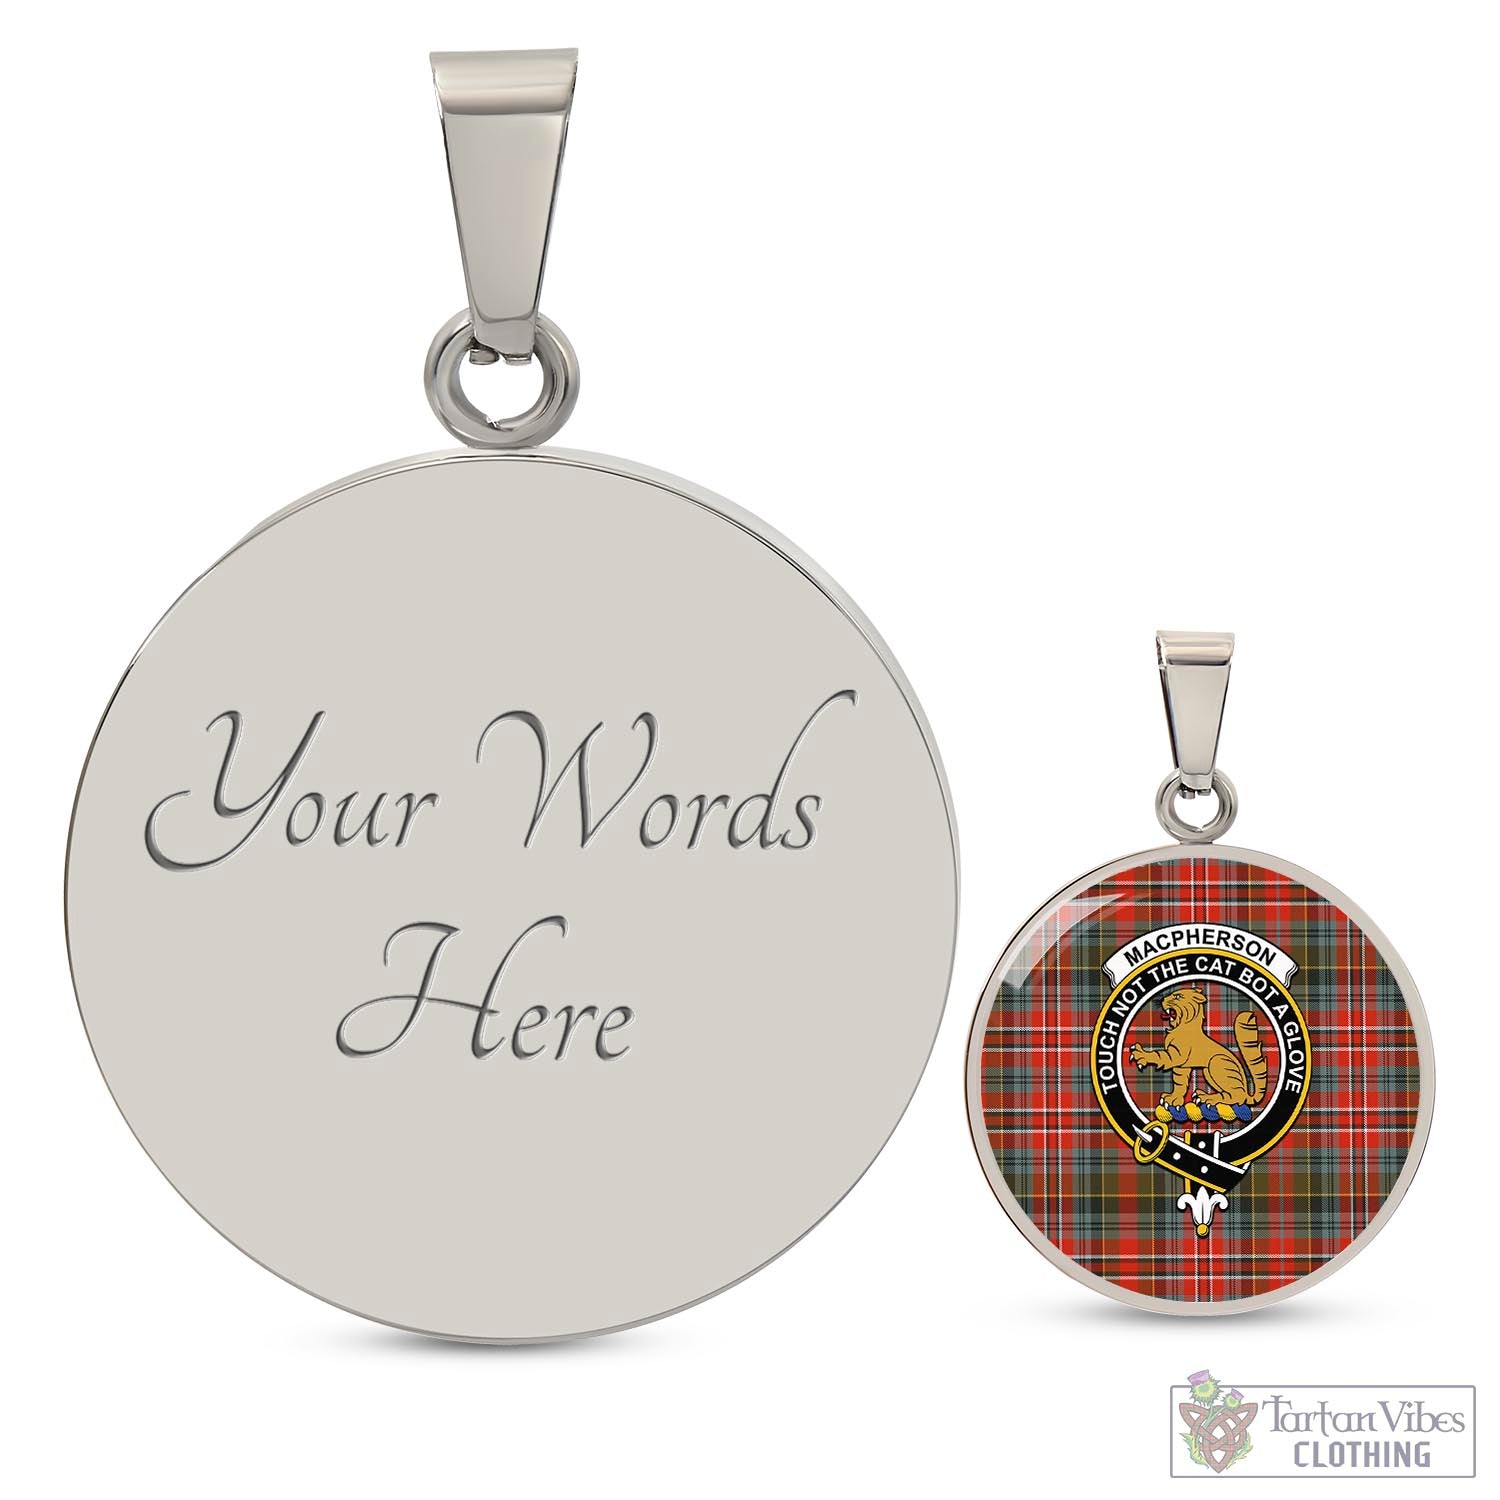 Tartan Vibes Clothing MacPherson Weathered Tartan Circle Necklace with Family Crest